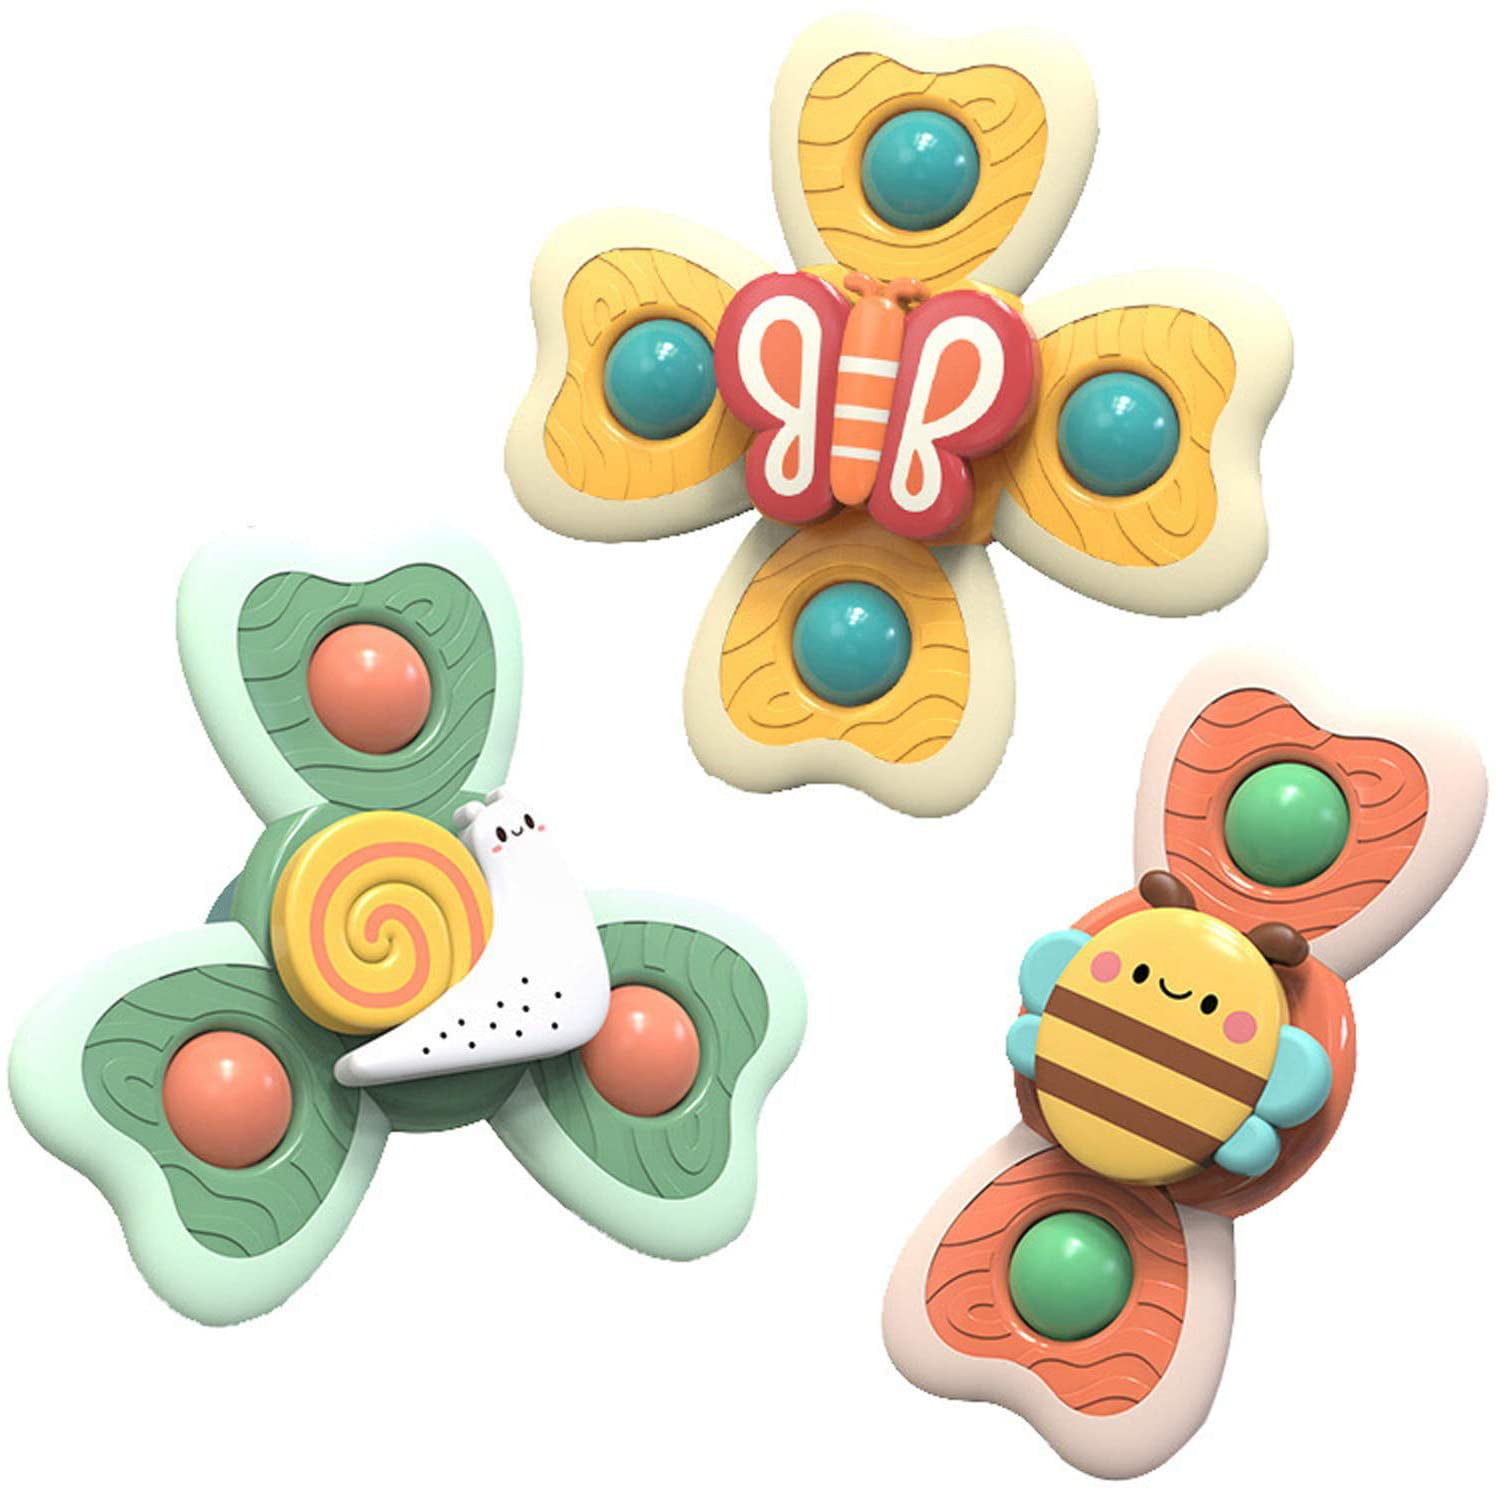 Spin Sucker Suction Cup Animal Bath Toys Turntable Spinning Windmill Stress Relief Frisbee Toy Table Sucker Early Learner 3Pcs-Bee Ladybug Butterfly Baby Child Spinning Top Toy 